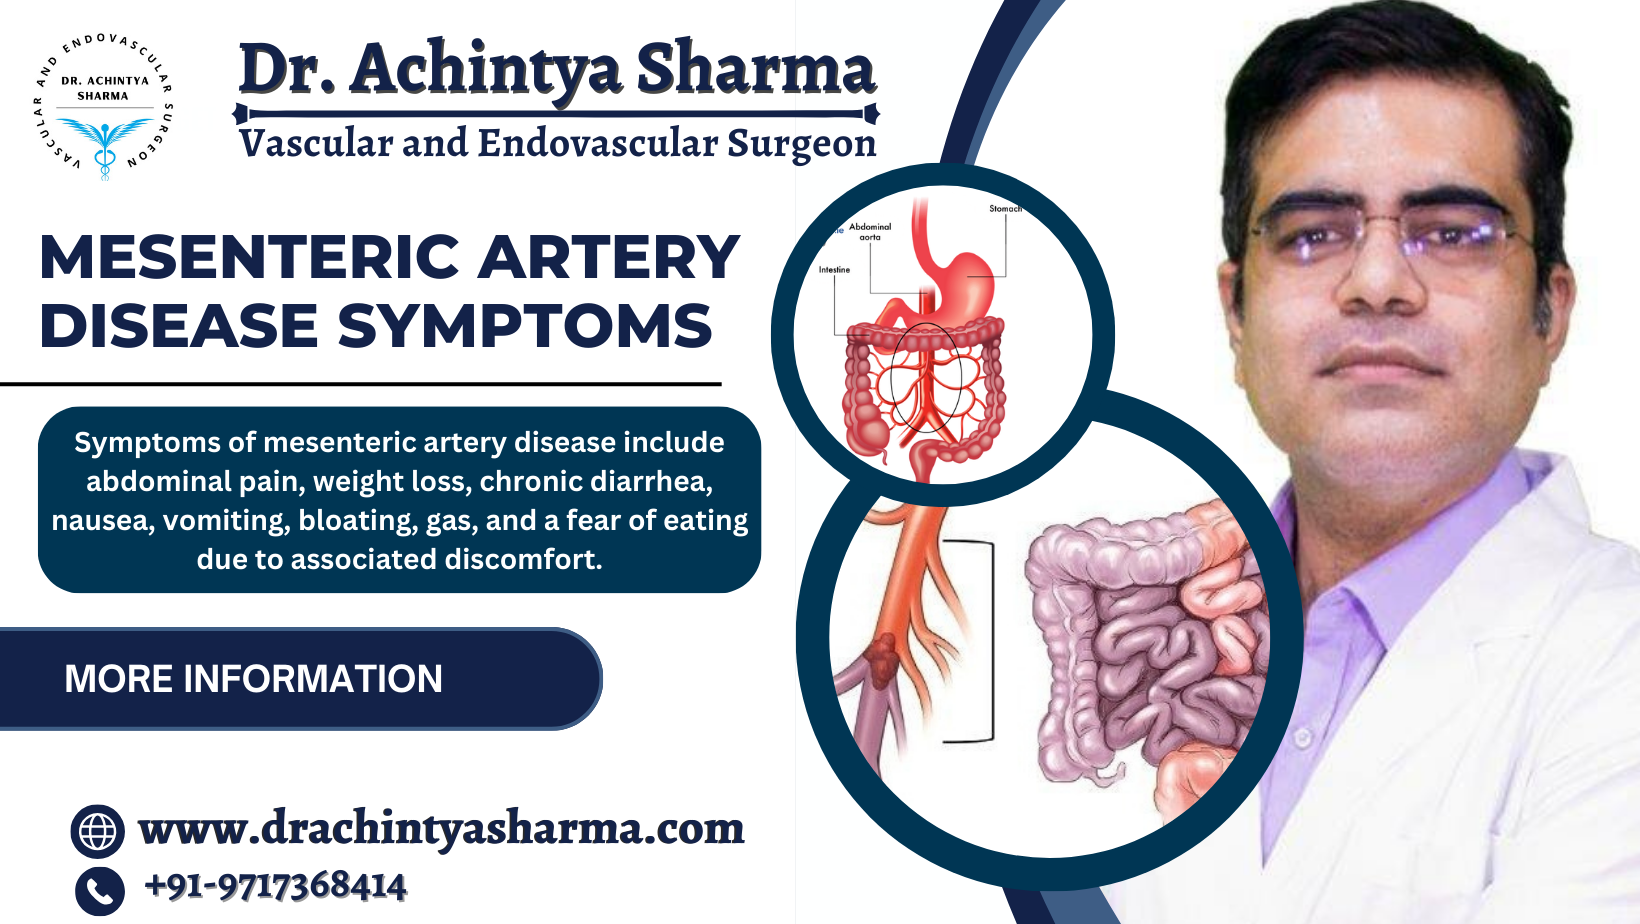 How to Recognize the Signs of Mesenteric Artery Disease Symptoms